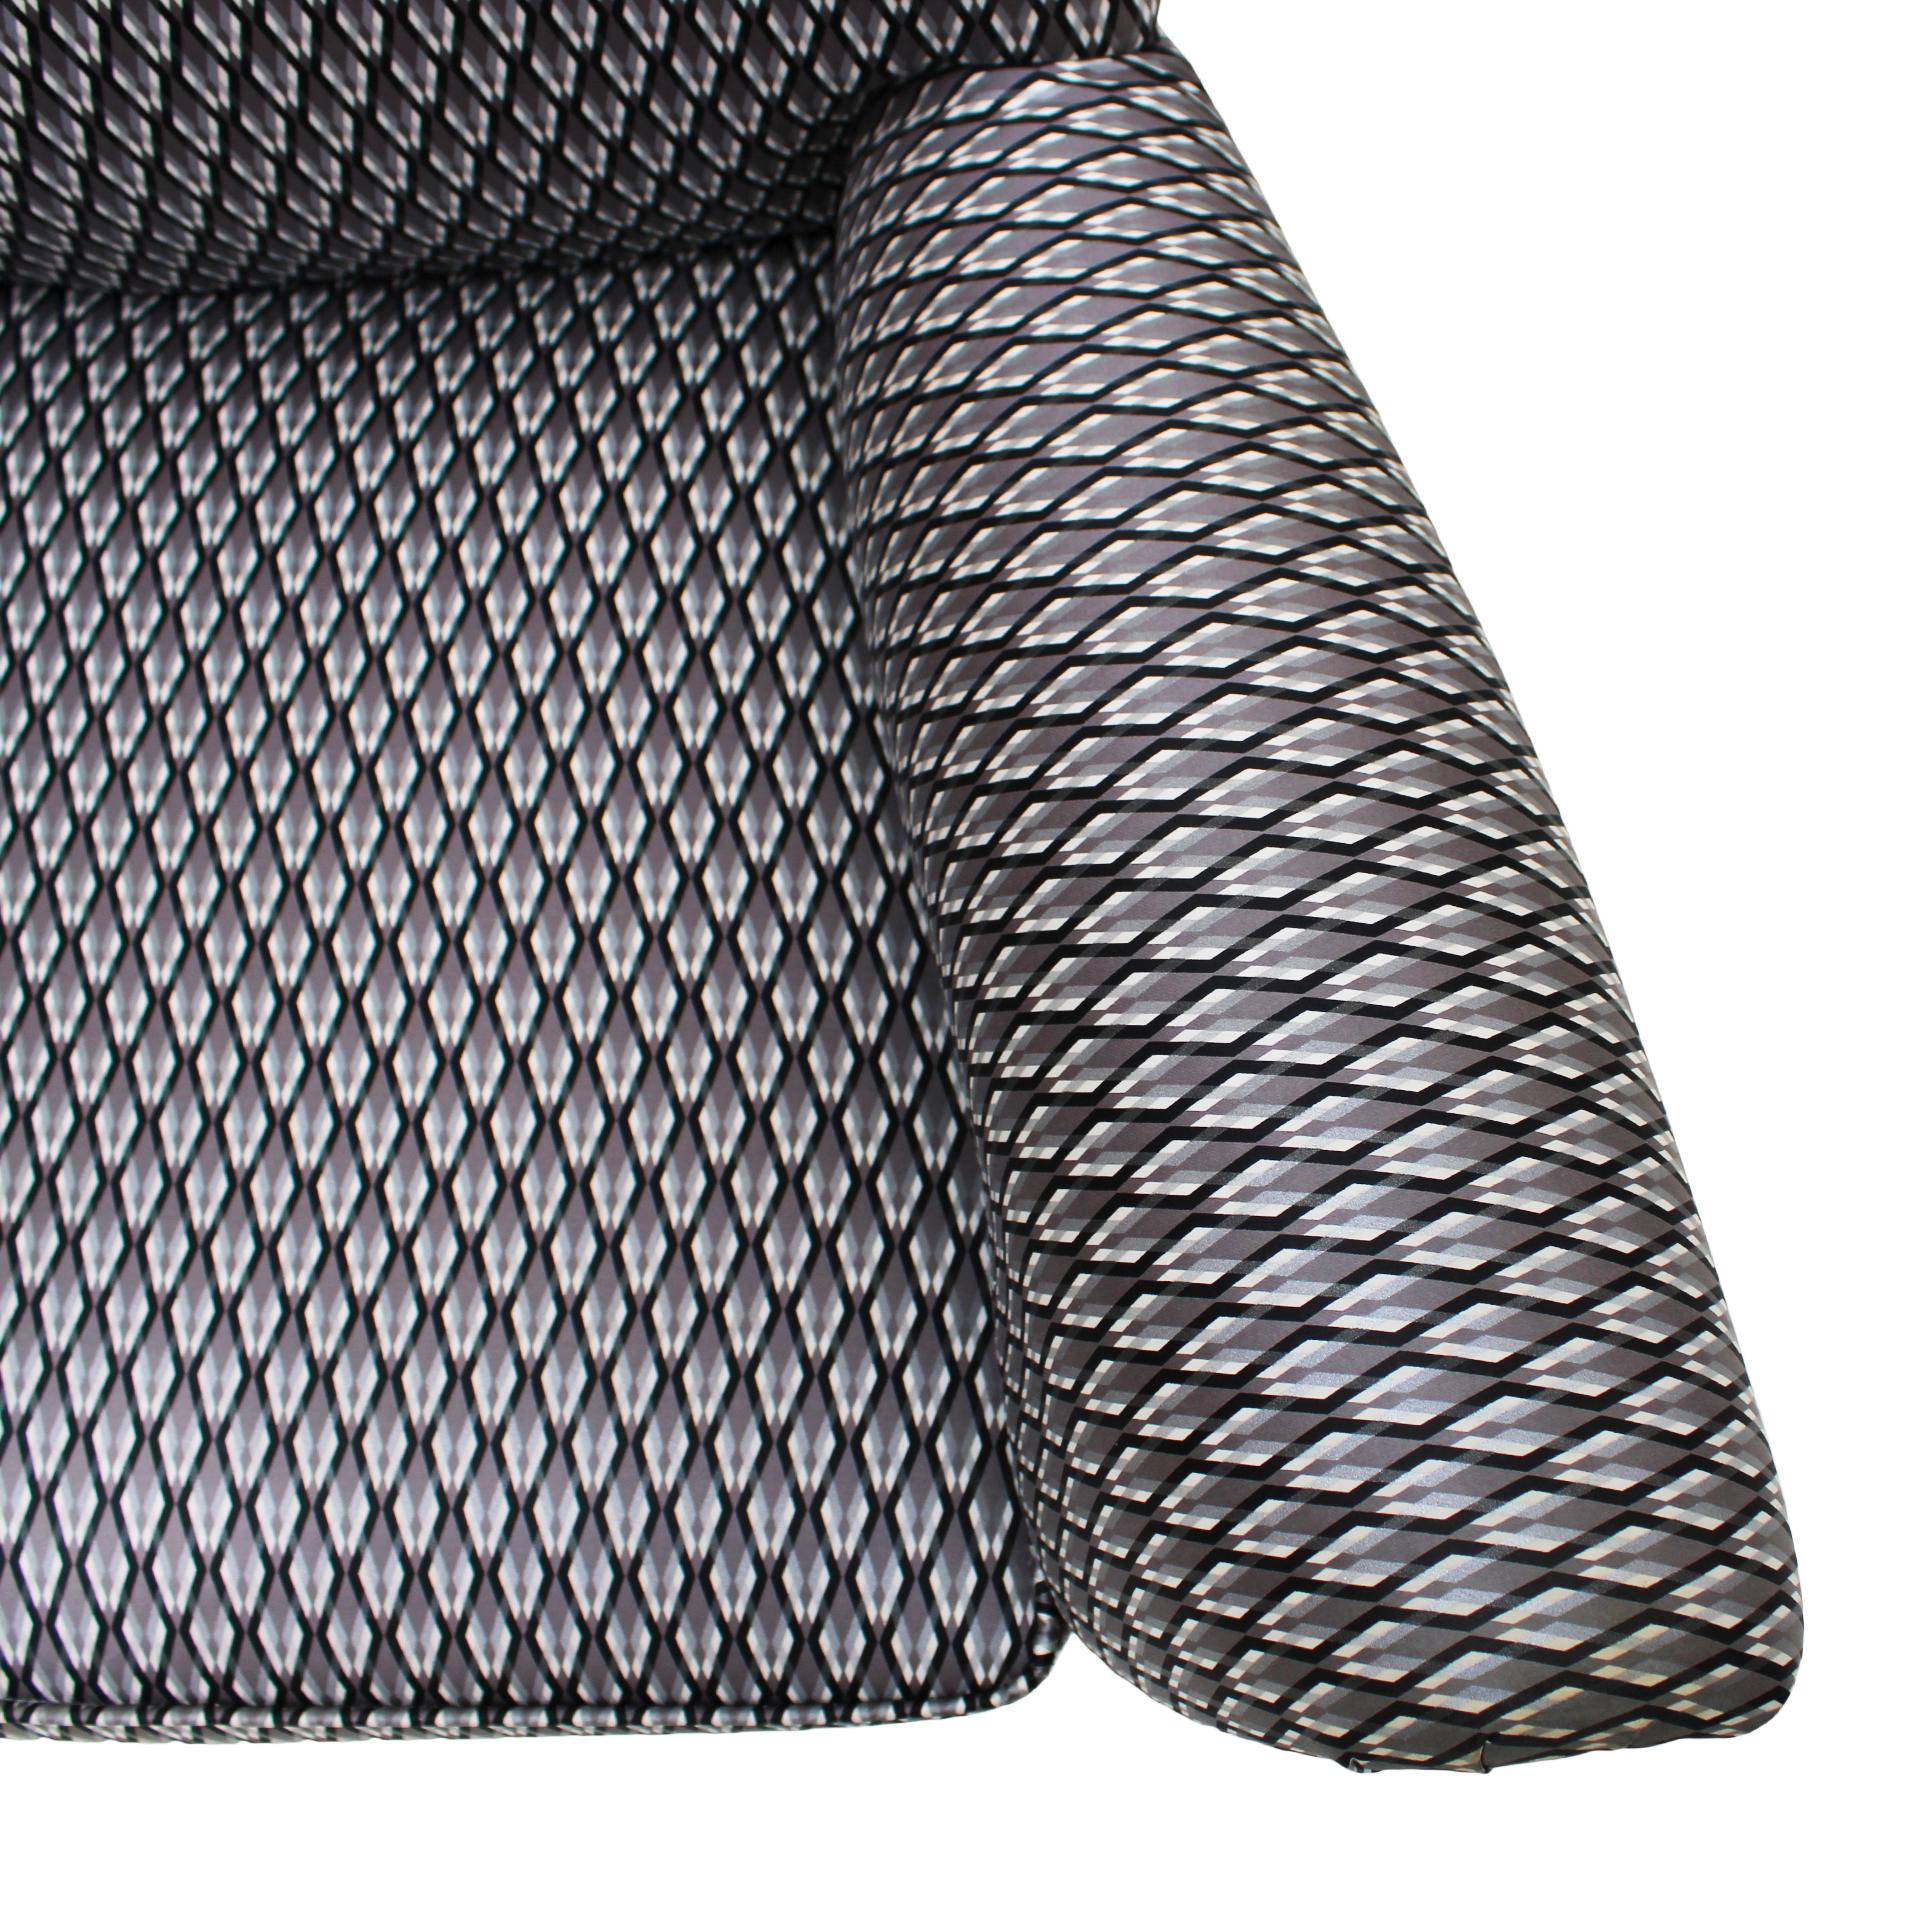 Gigi Radice Mid-Century Armchair Upholstered in Serpentino Fabric In Good Condition For Sale In Ibiza, Spain